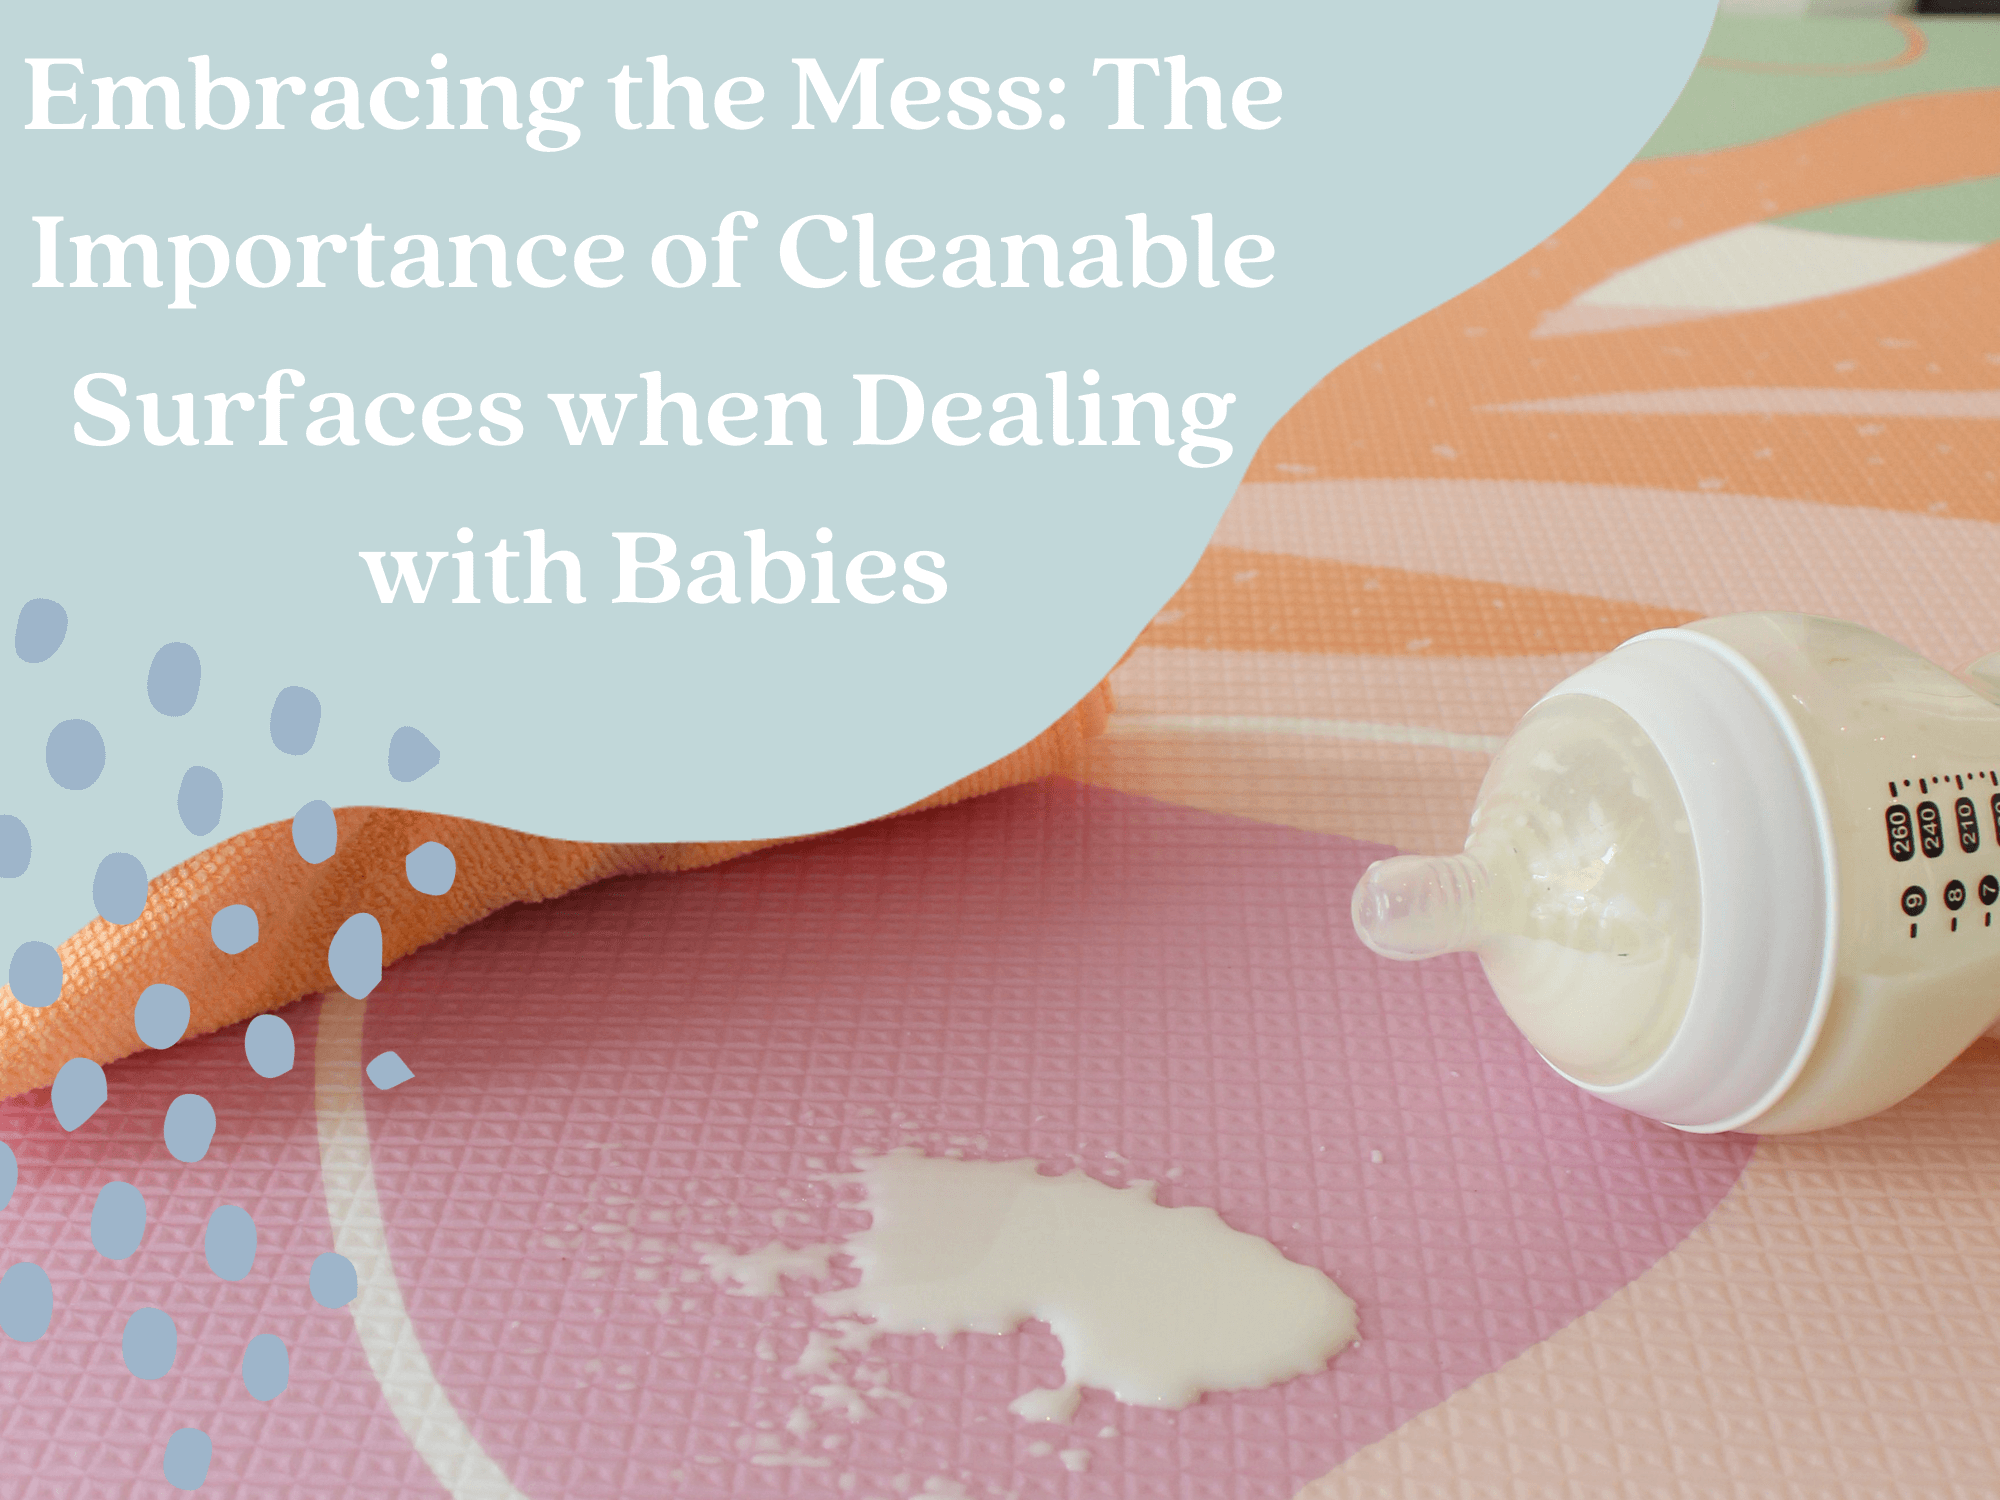  Embracing the Mess: Cleaning Hacks for New Parents